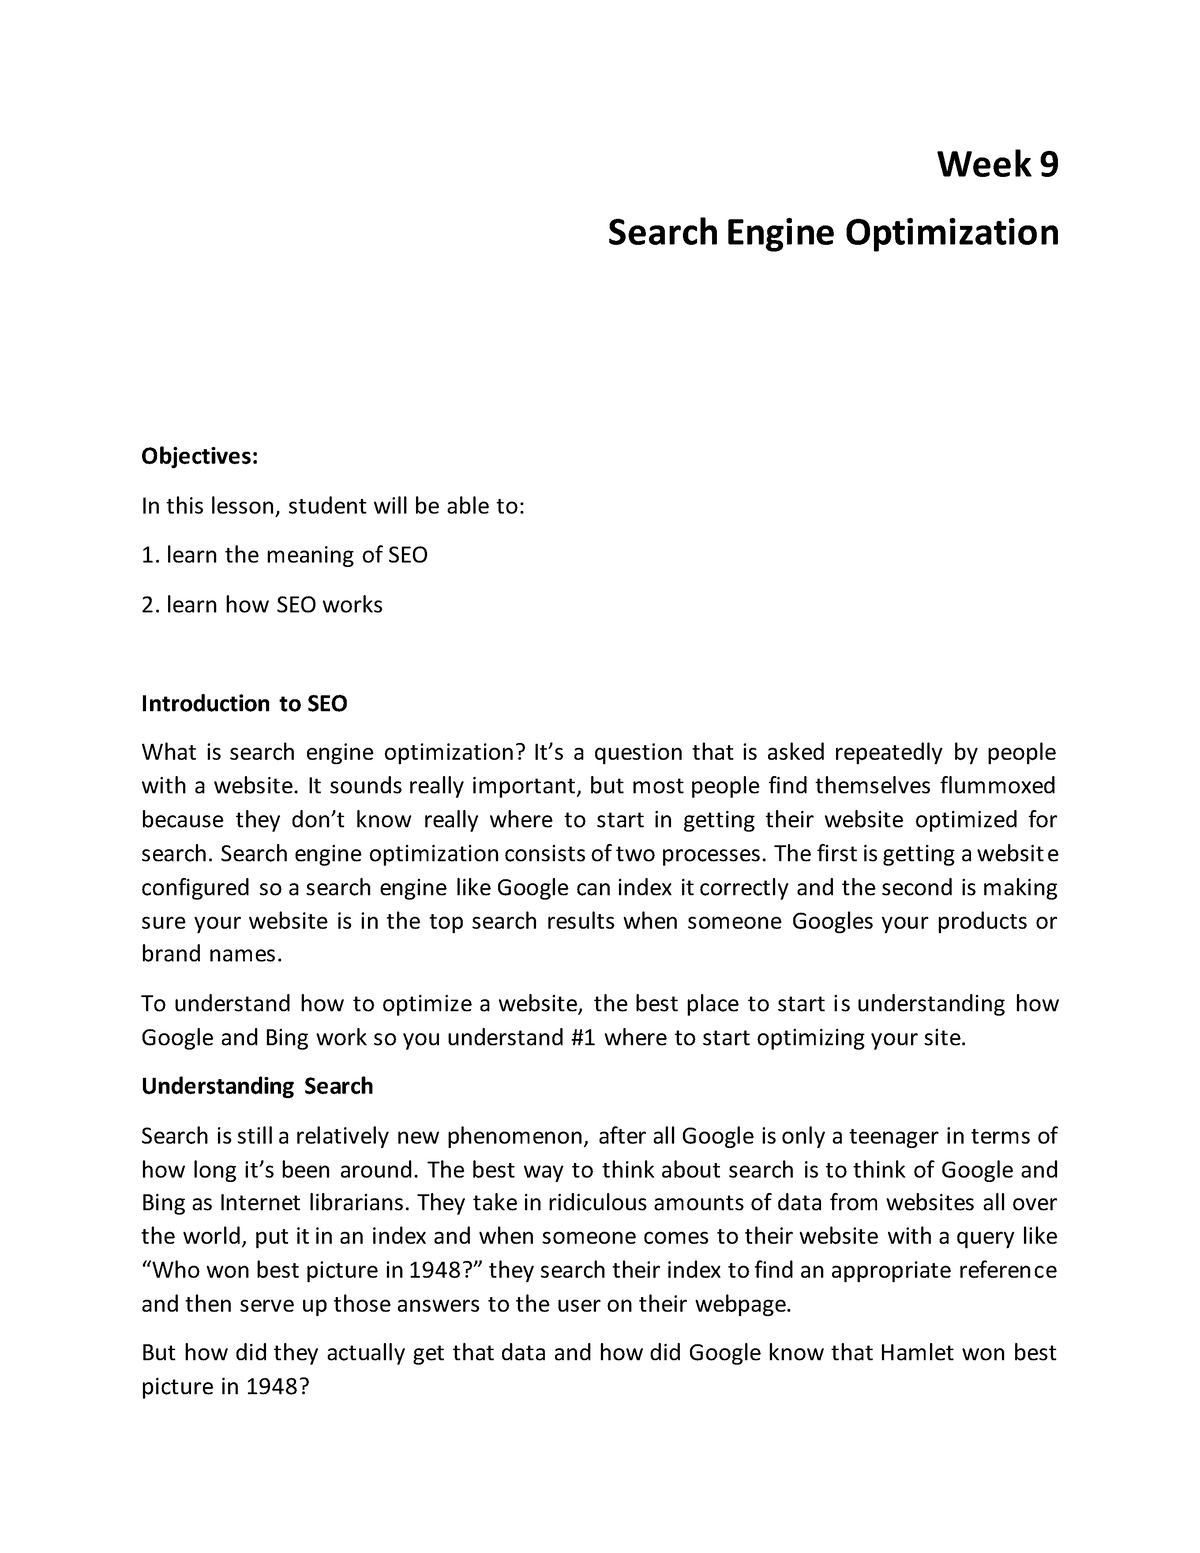 search engine optimization research papers pdf